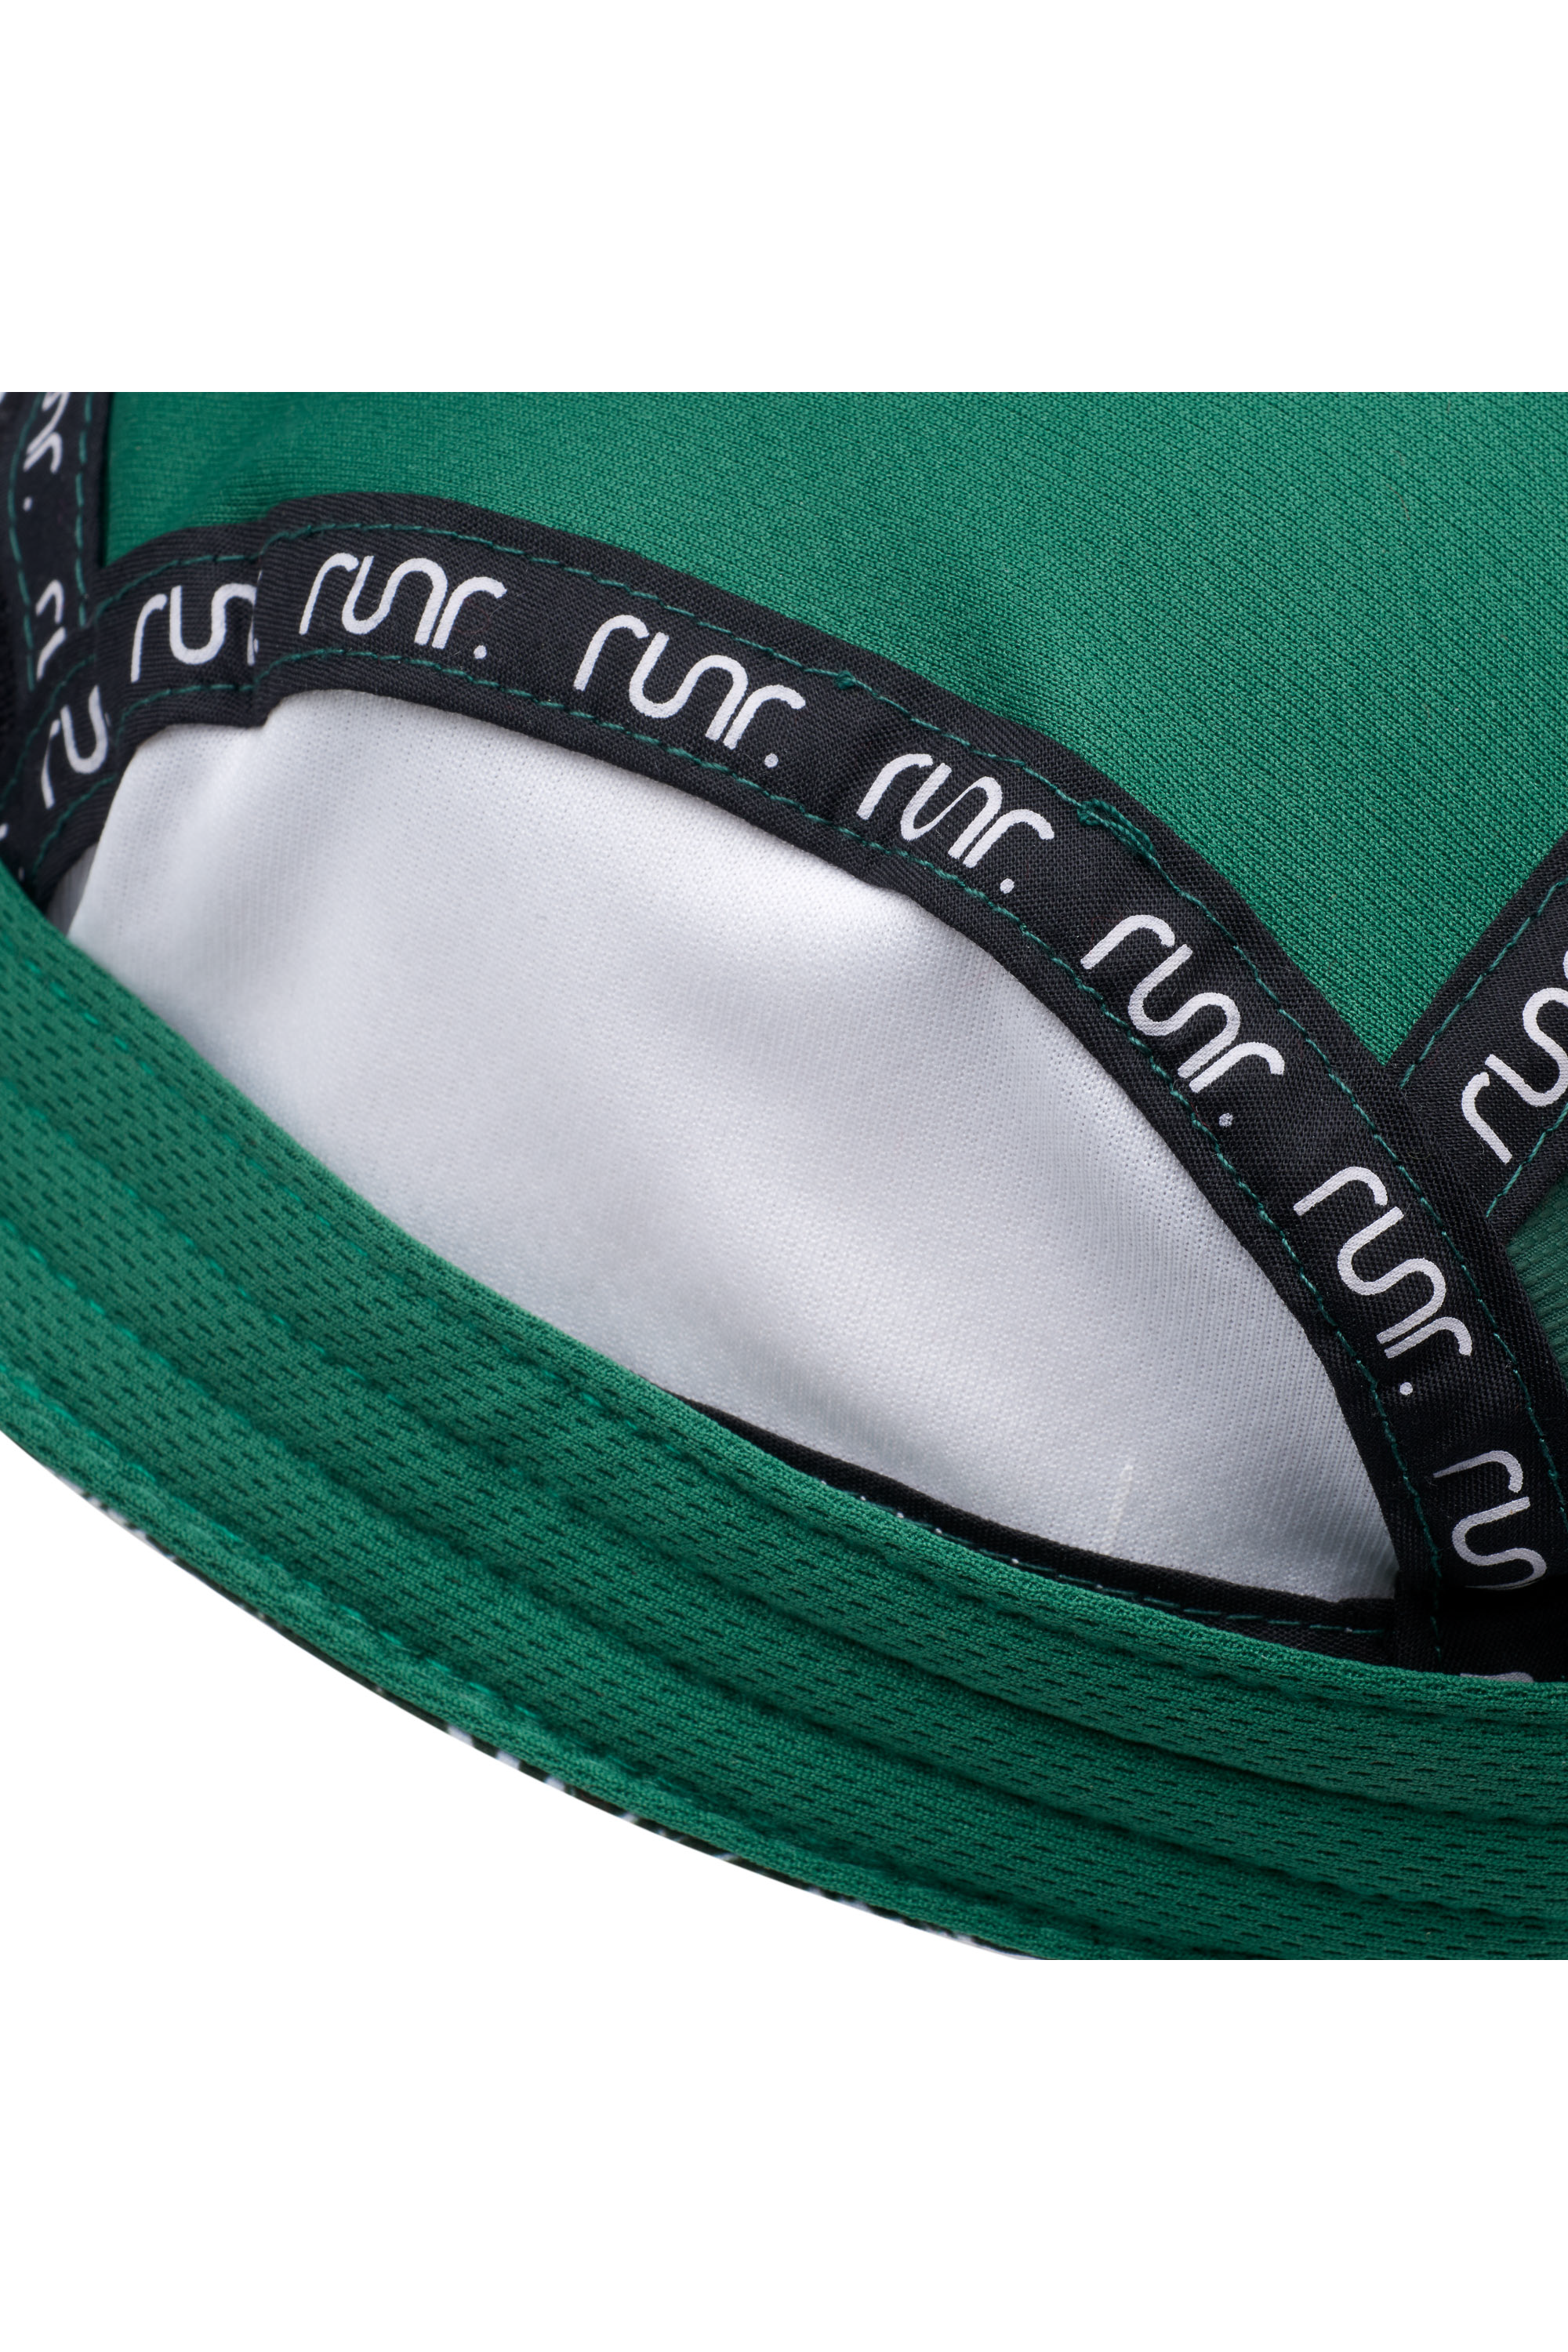 Runr 'Leave Nothing But Footprints' Technical Running Hat - Sole Mate